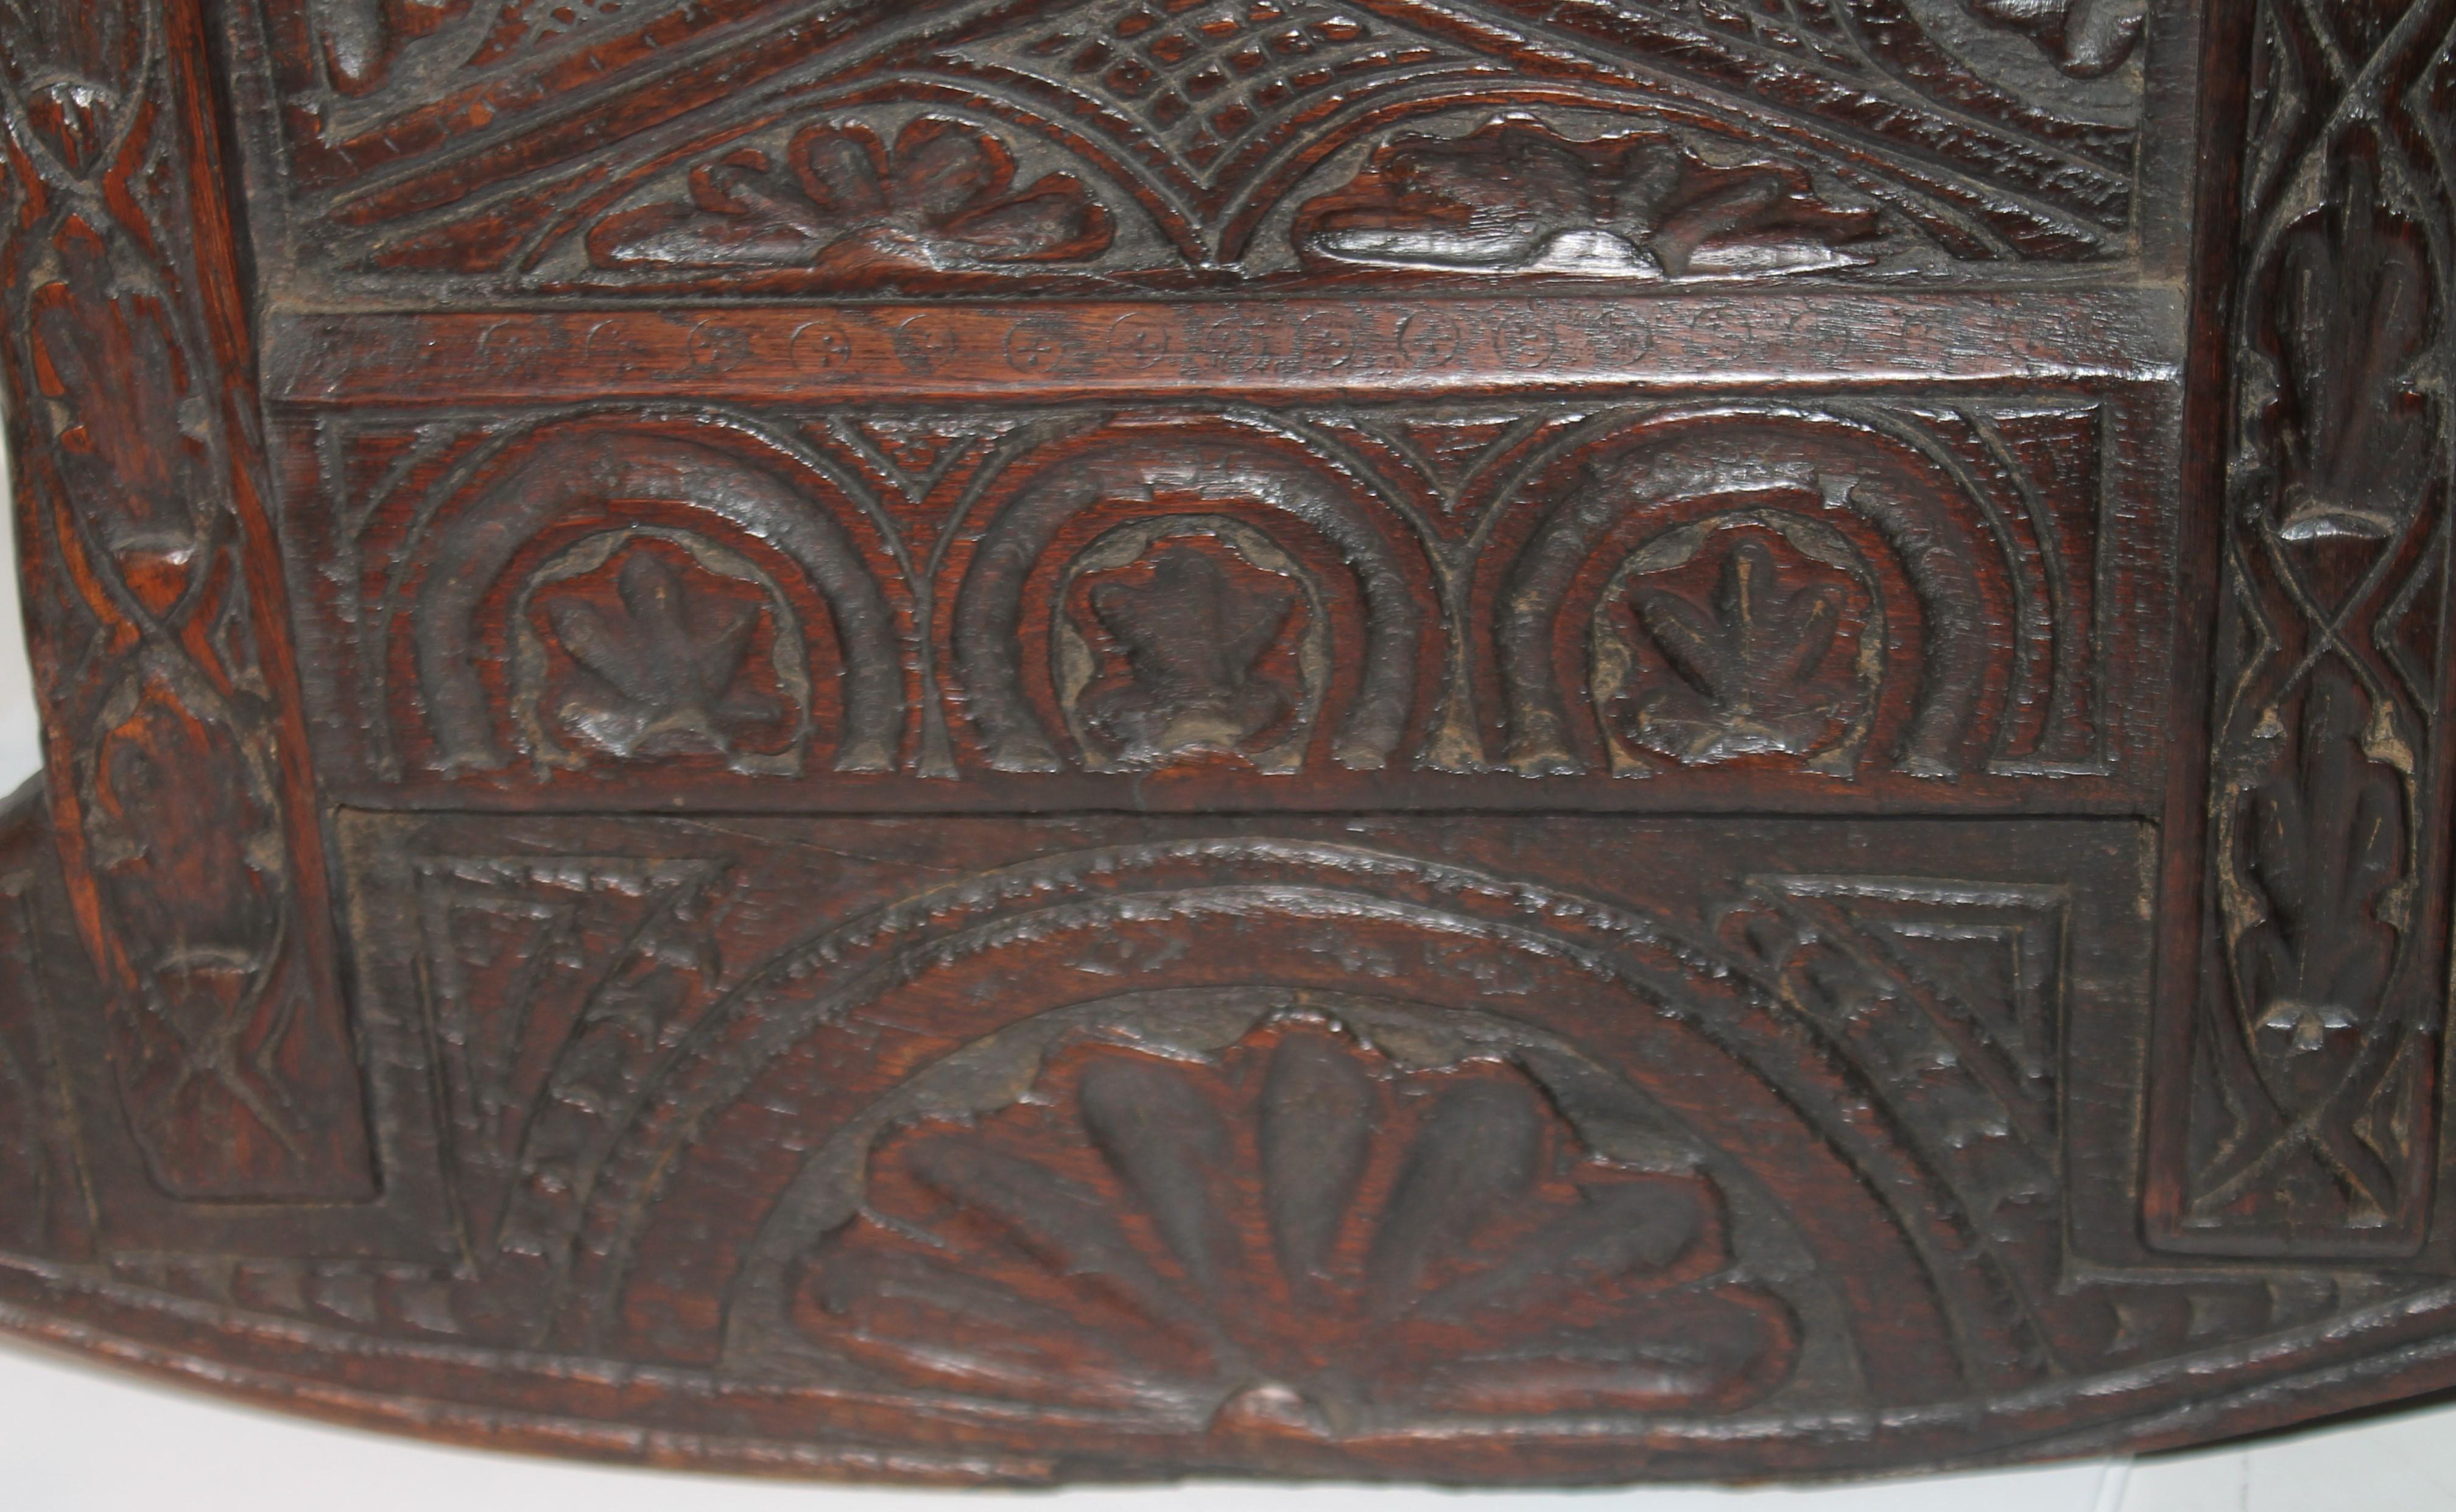 Hand-Carved 17th C European Hodded Infant Cradle Dated 1658 For Sale